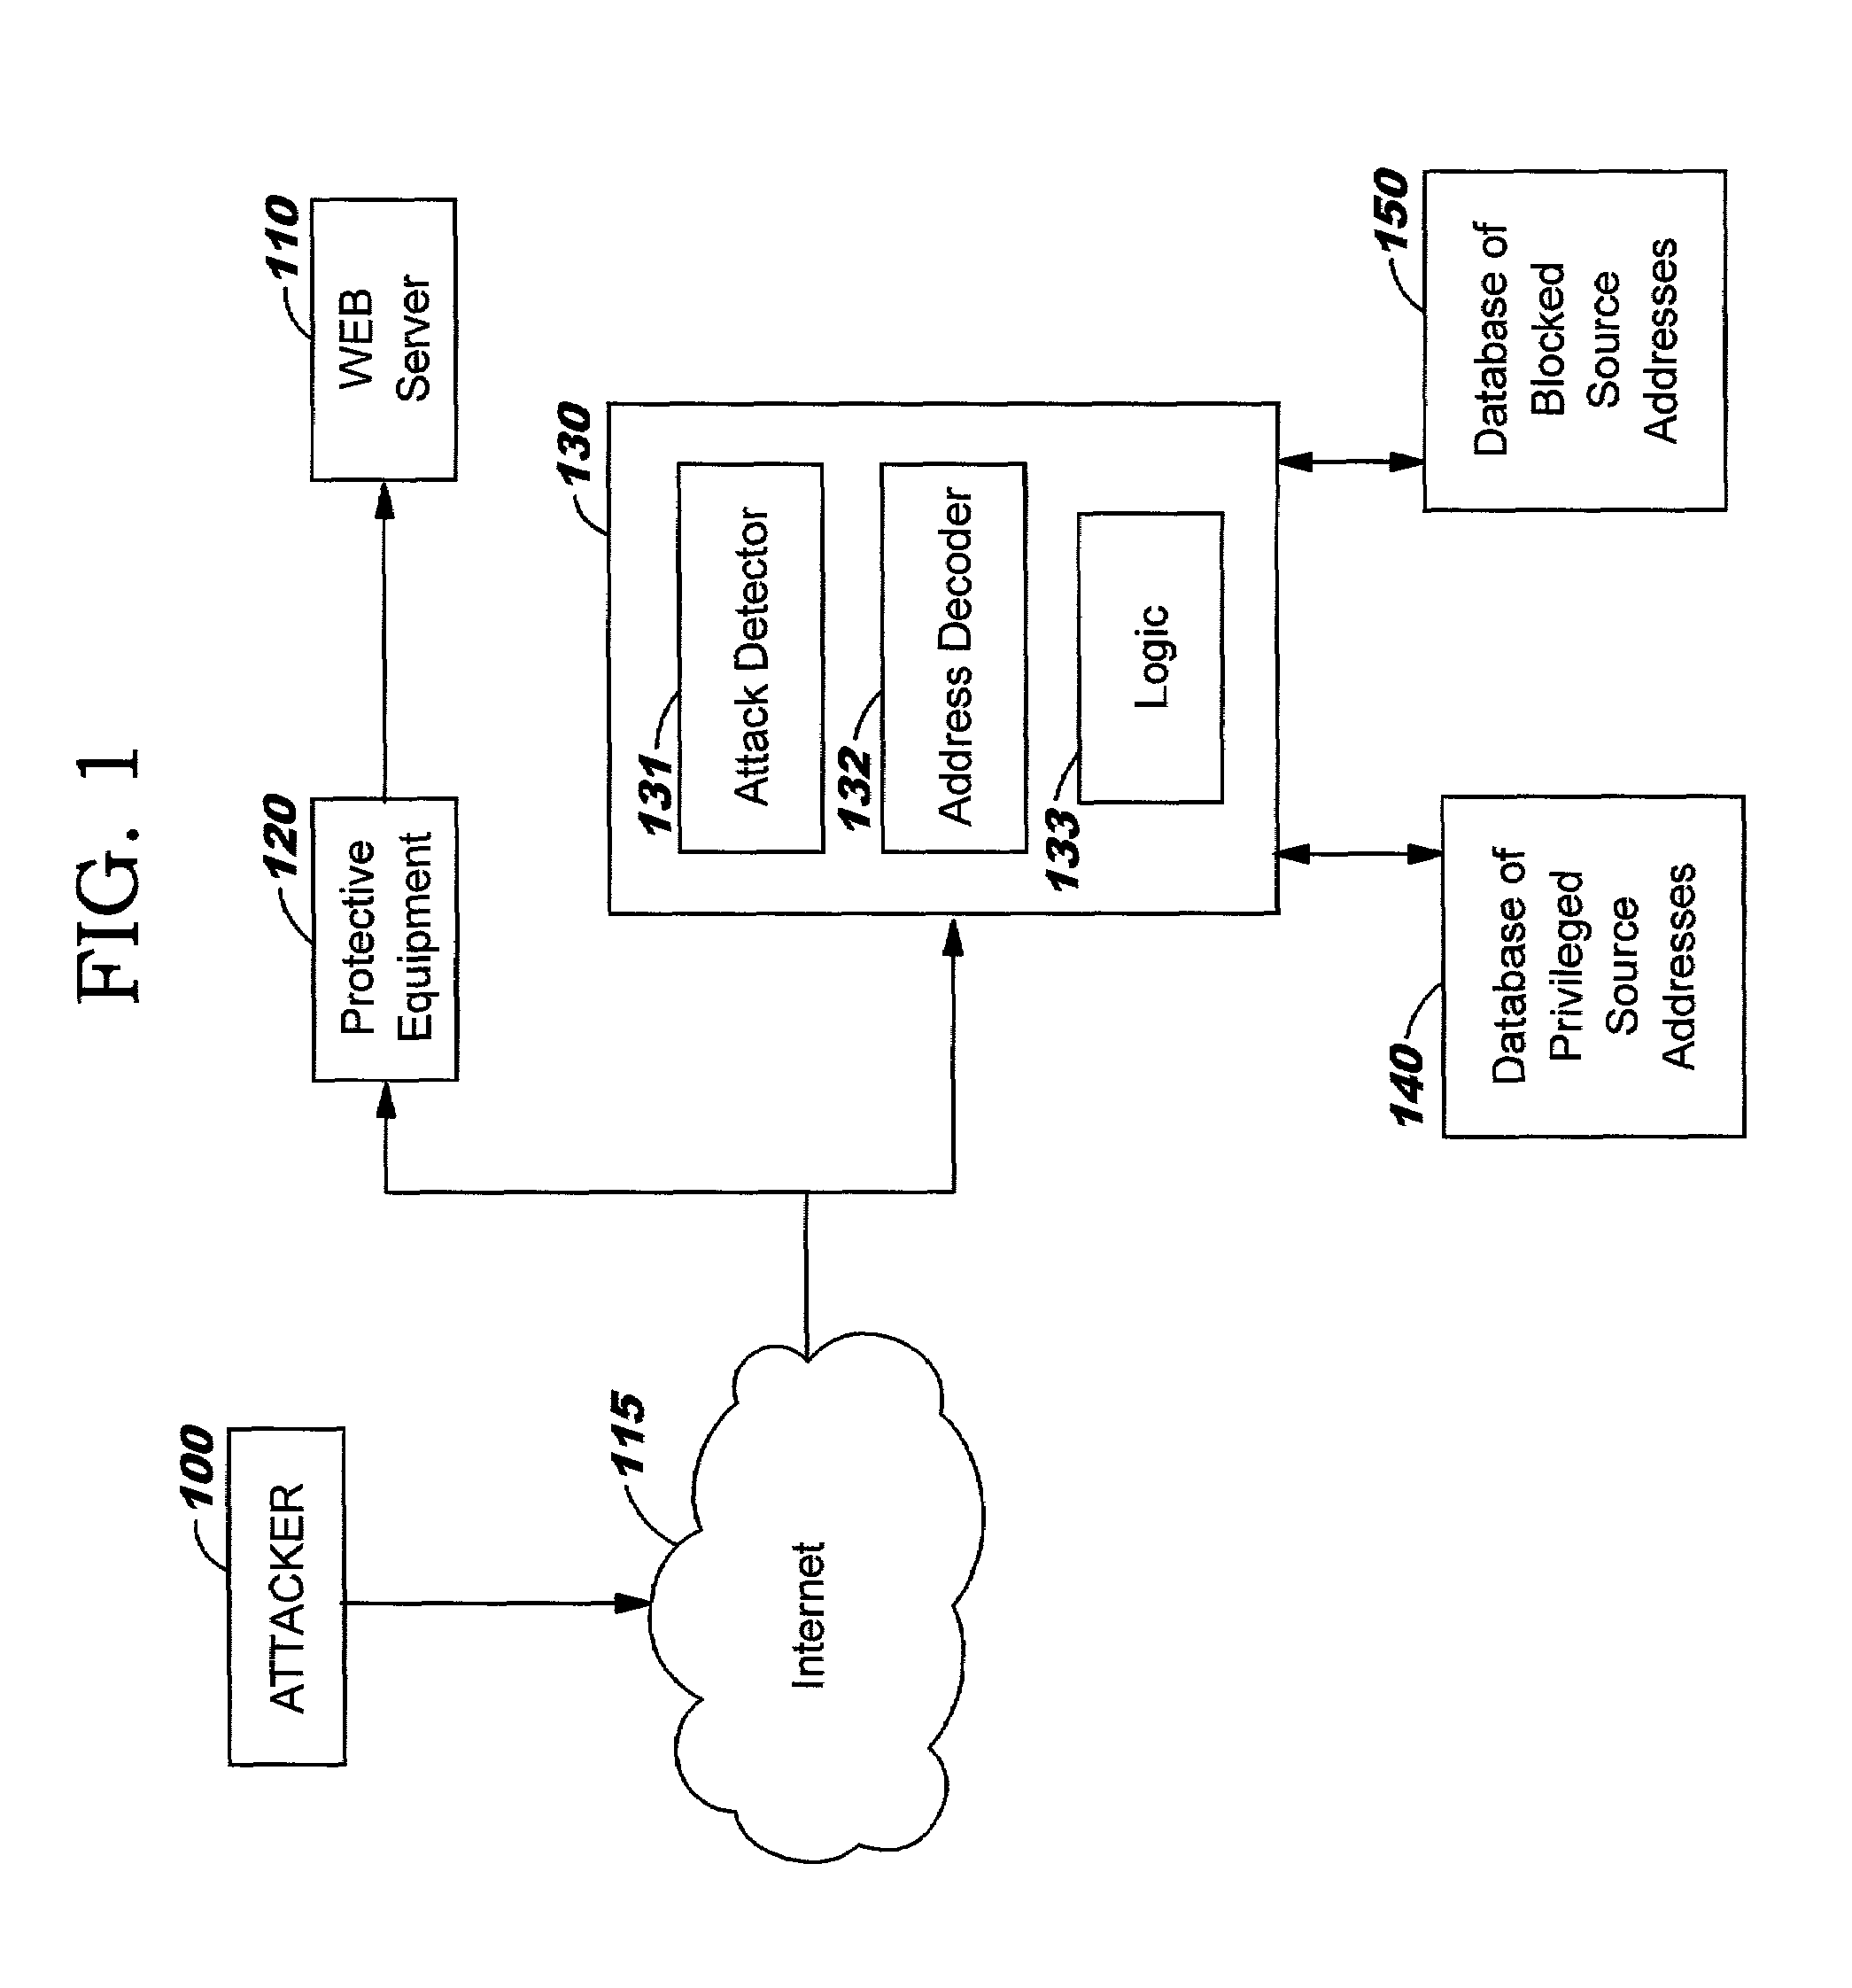 Method and apparatus for protecting a web server against vandals attacks without restricting legitimate access